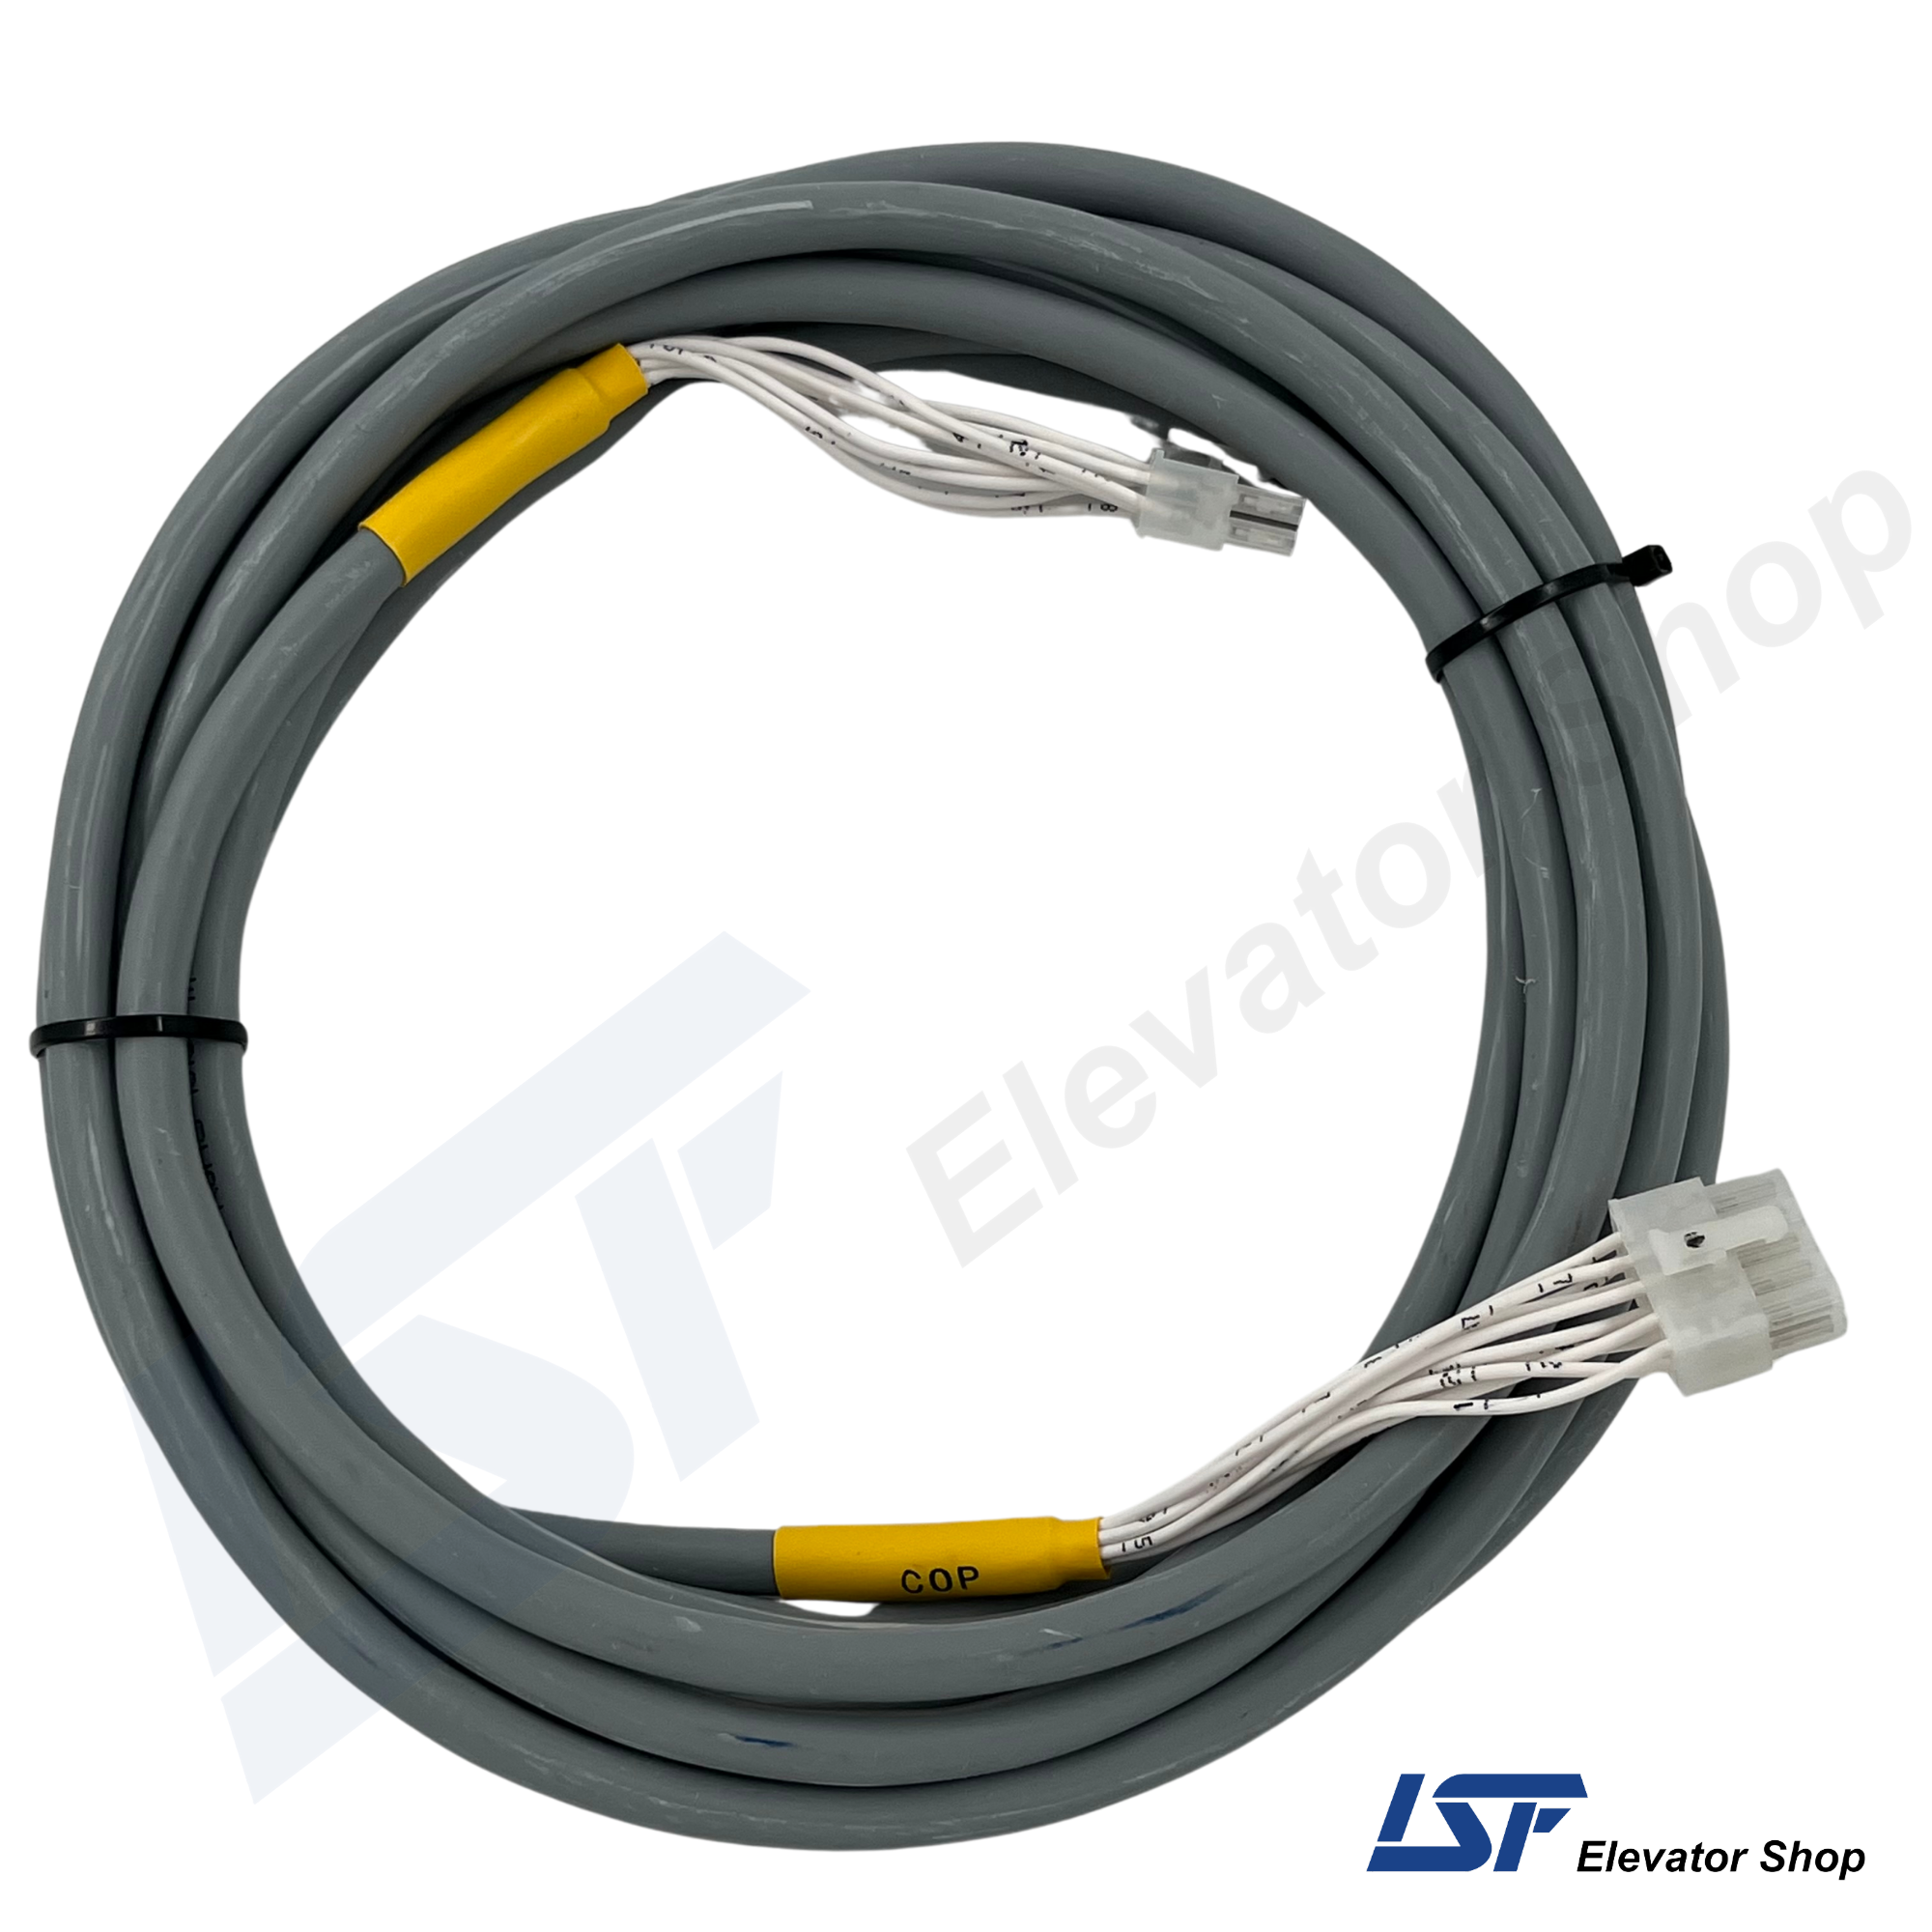 KBL-COP Arkel Cable 5m. for Elevator Systems